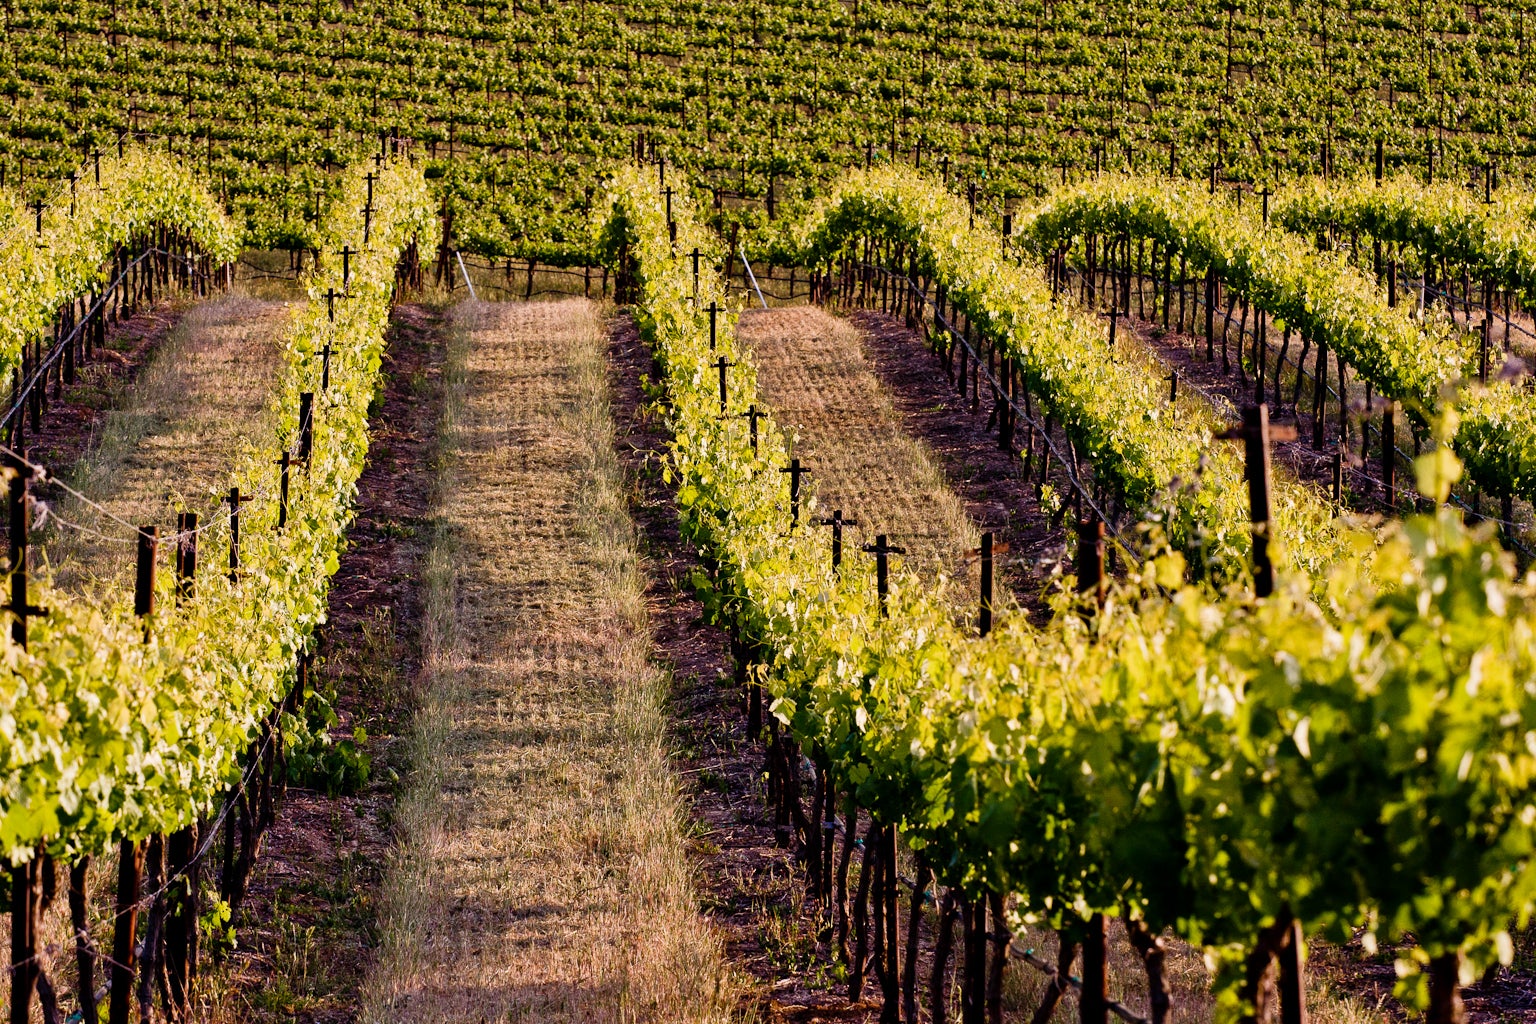 Water scarcity has affected California vineyards